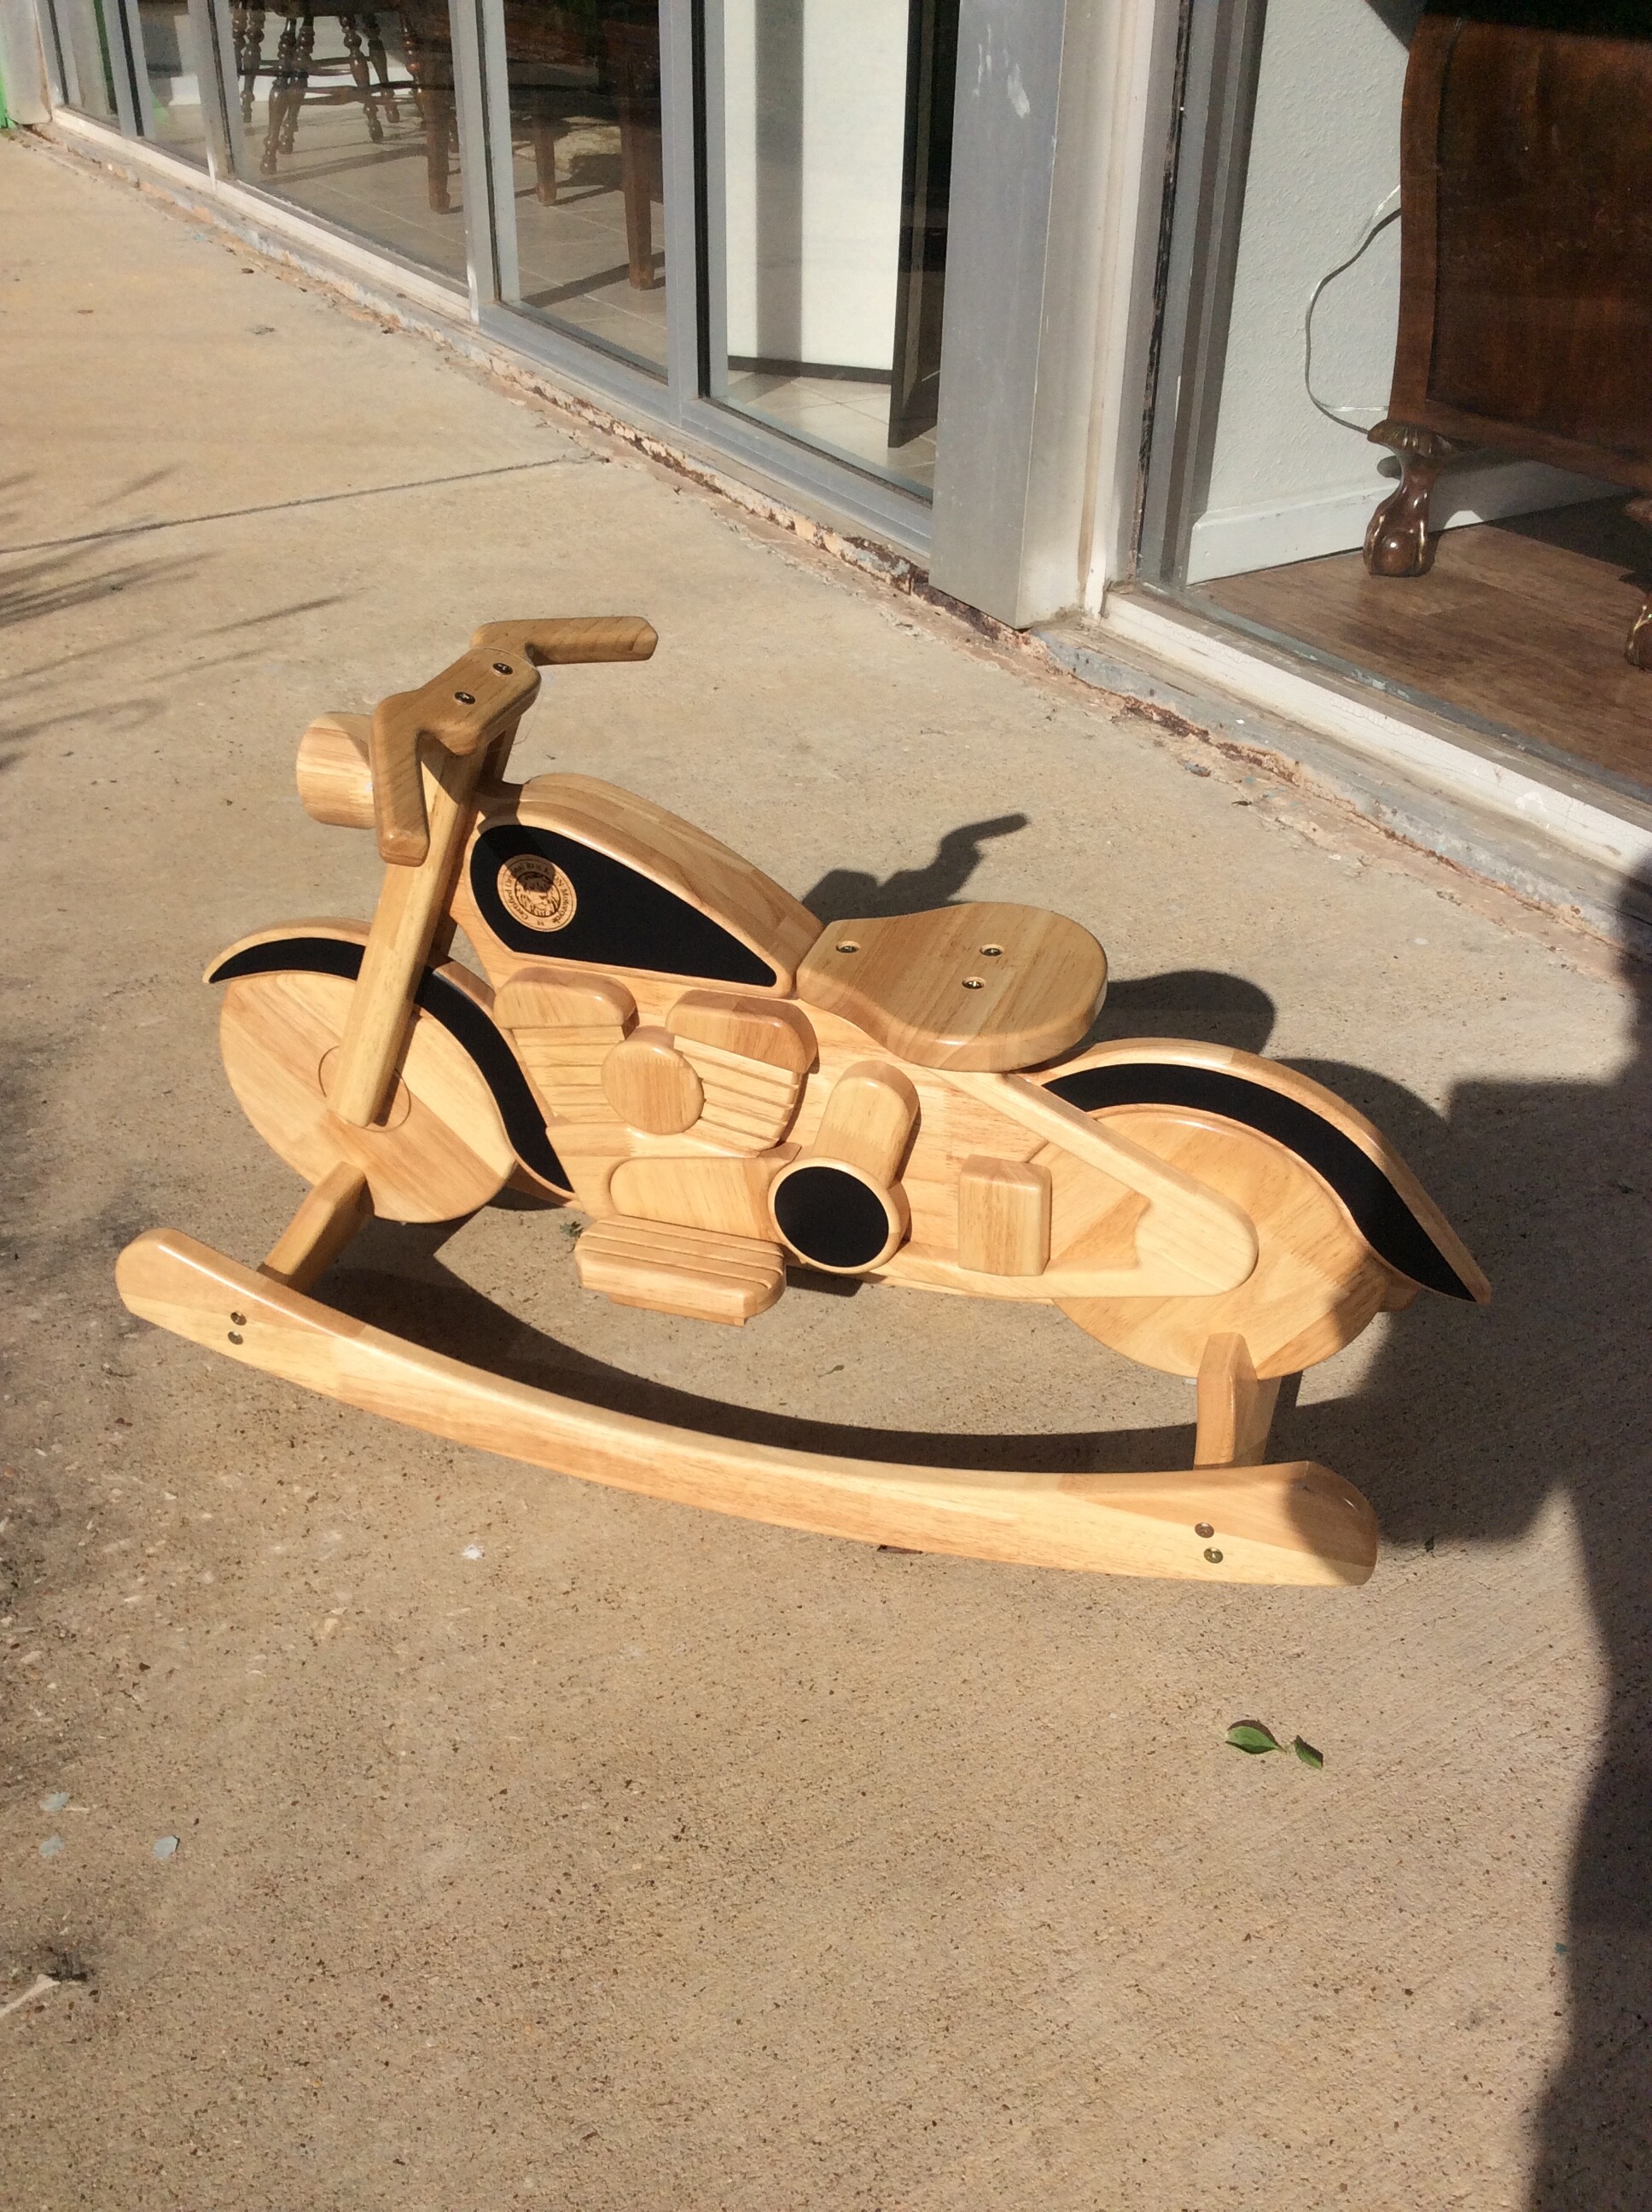 Cute Harley rocker! From East West Wood Products this is a Certified Original ROCK-ON Motorcycle.